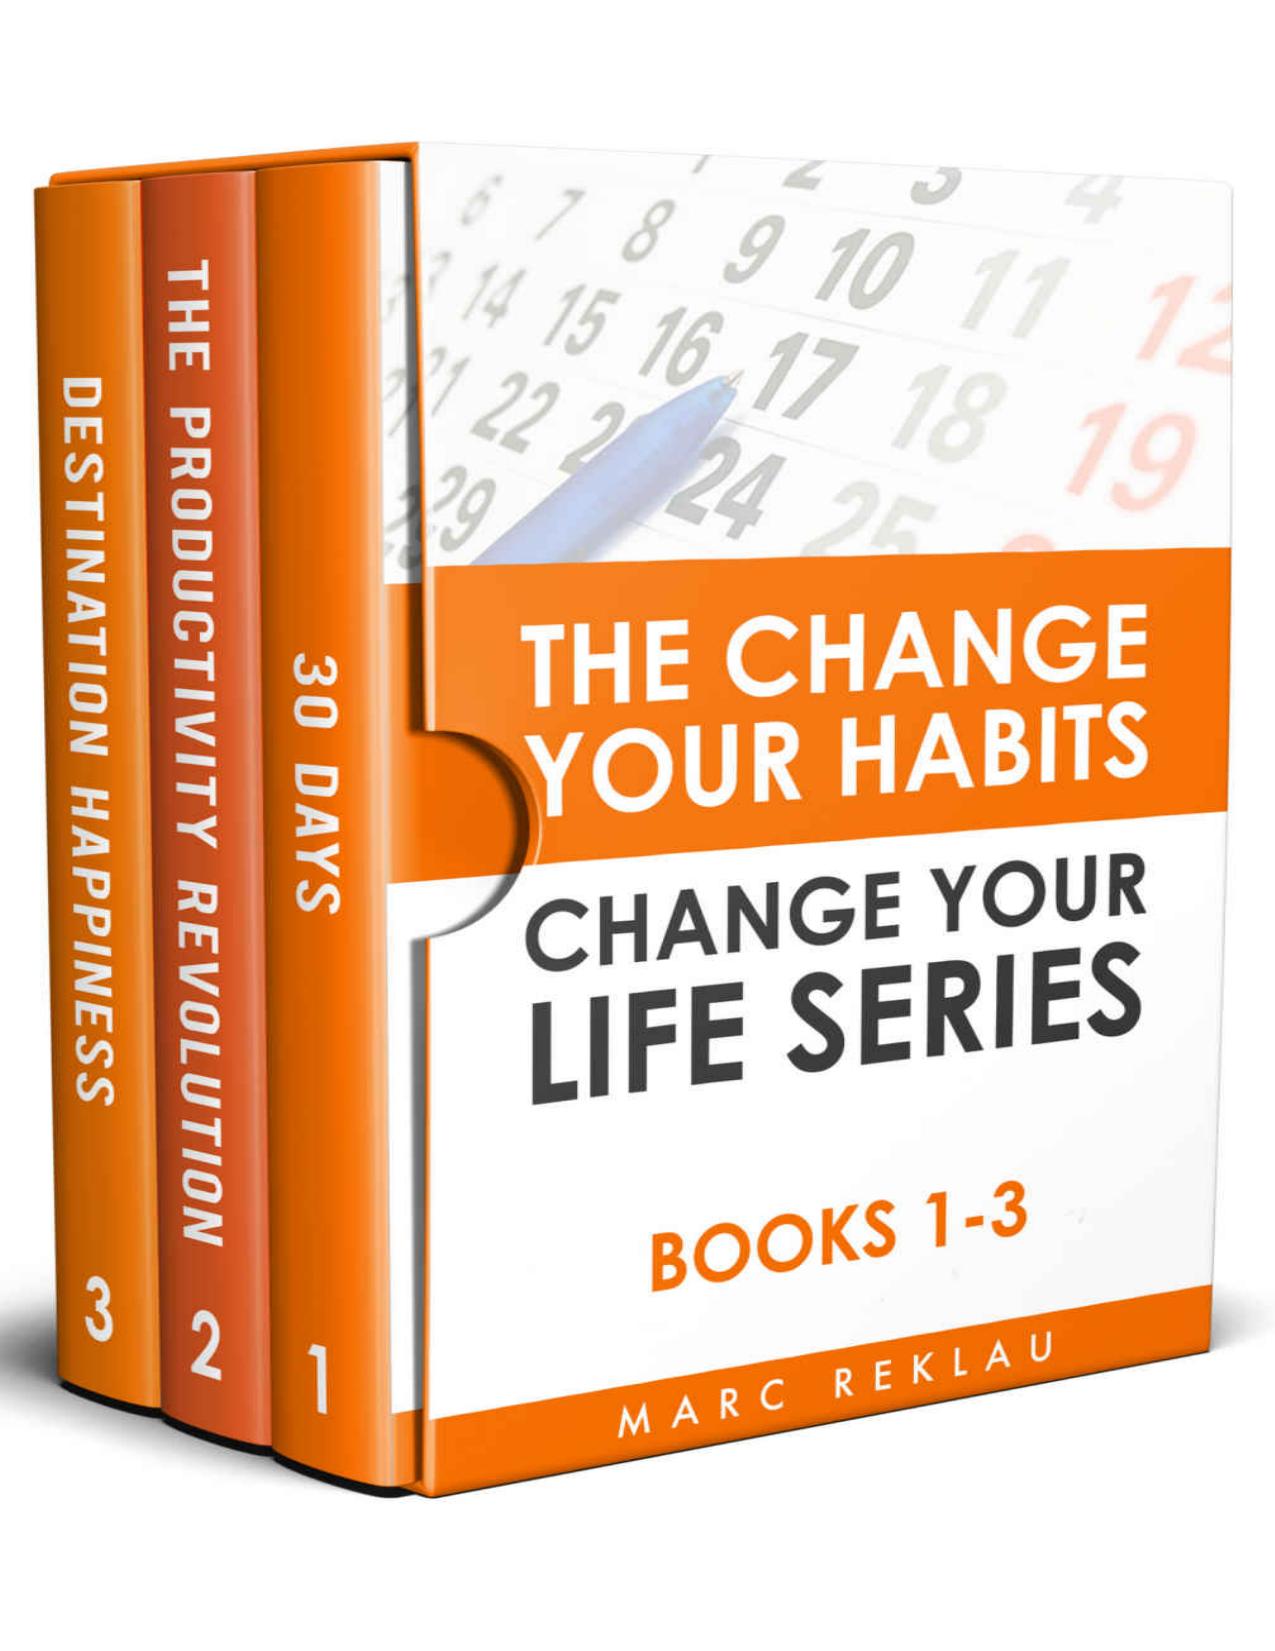 The Change Your Habits, Change Your Life Series: Books 1-3 (Change your habits, Change your life Box Set) by Marc Reklau